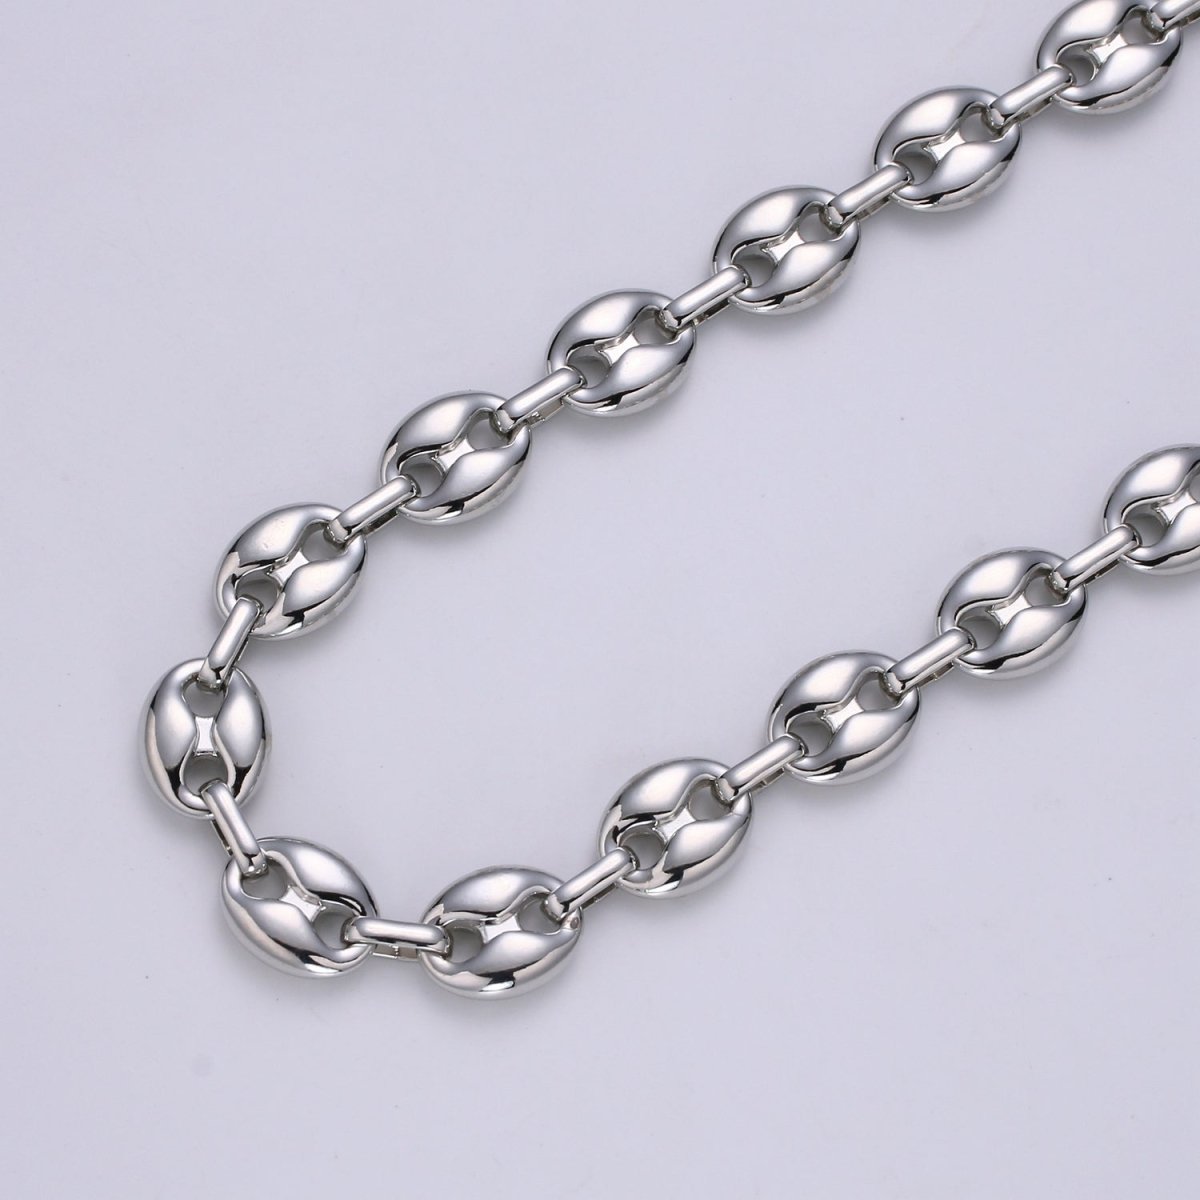 Chunky Silver Necklace Anchor Link Chain by Yard 10.5mmx13.6mm for Necklace Bracelet Component Unfinished Chain for DIY Jewelry Supply, 24K Gold Filled, White Gold Filled | ROLL-466, ROLL-467 Clearance Pricing - DLUXCA